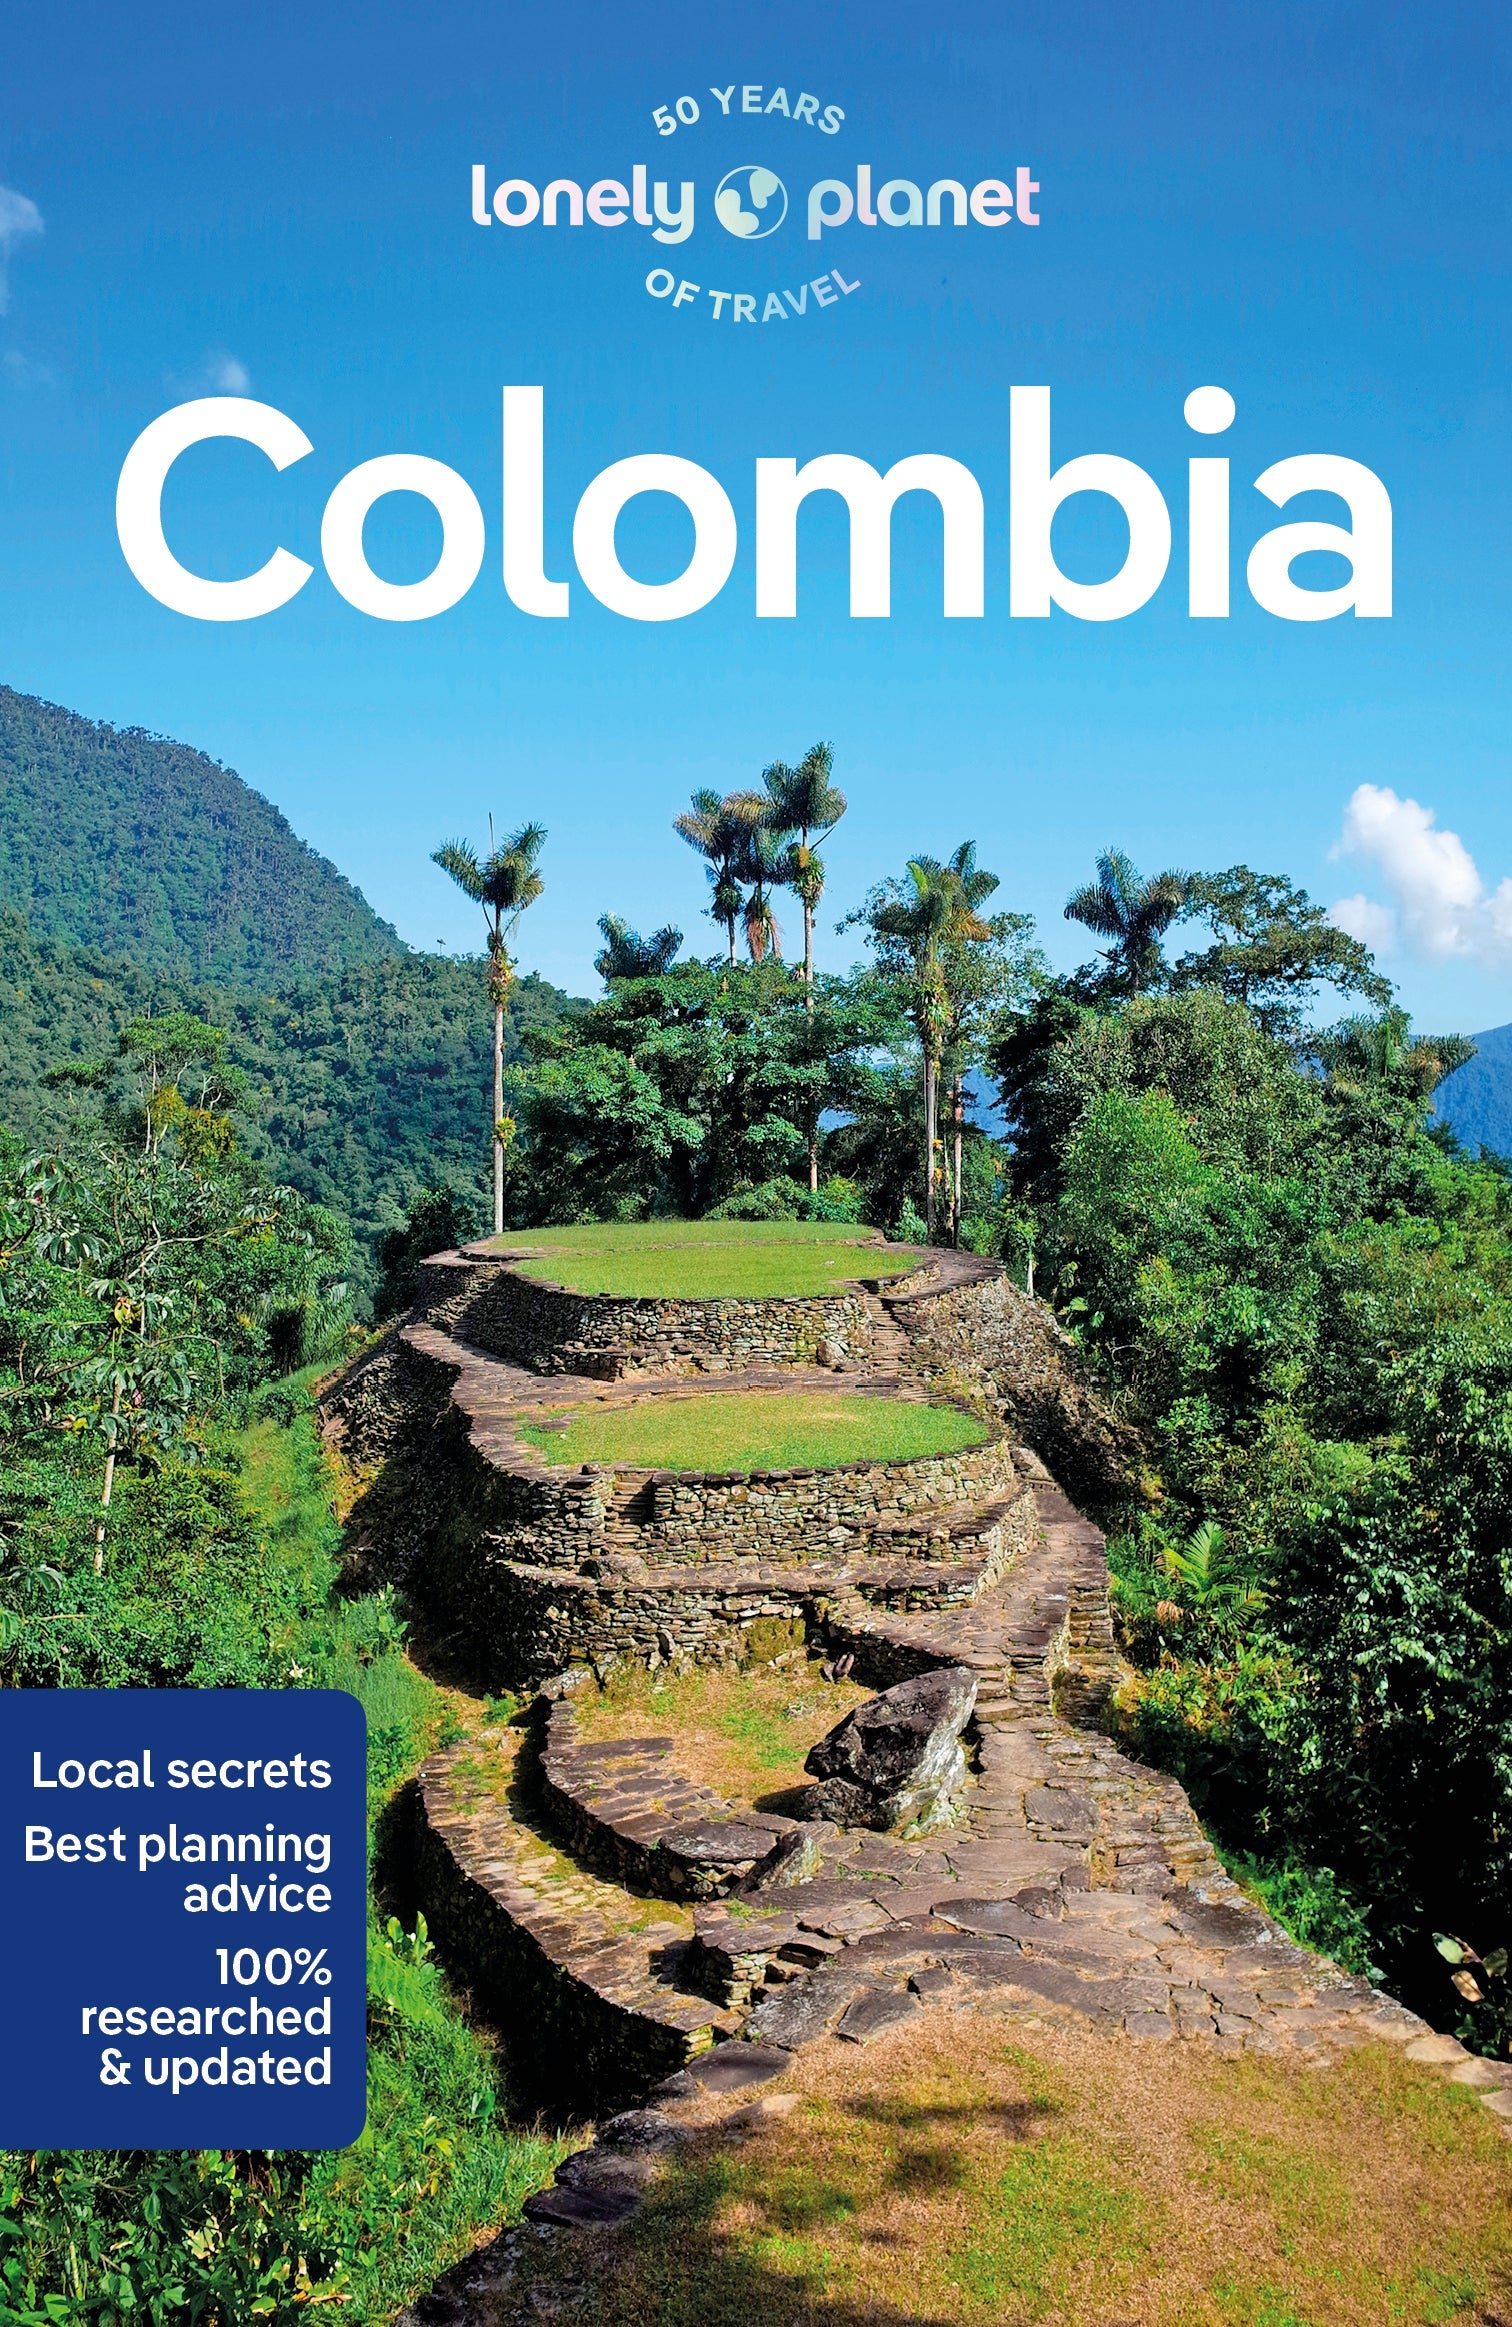 Book　Colombia　Travel　and　Ebook